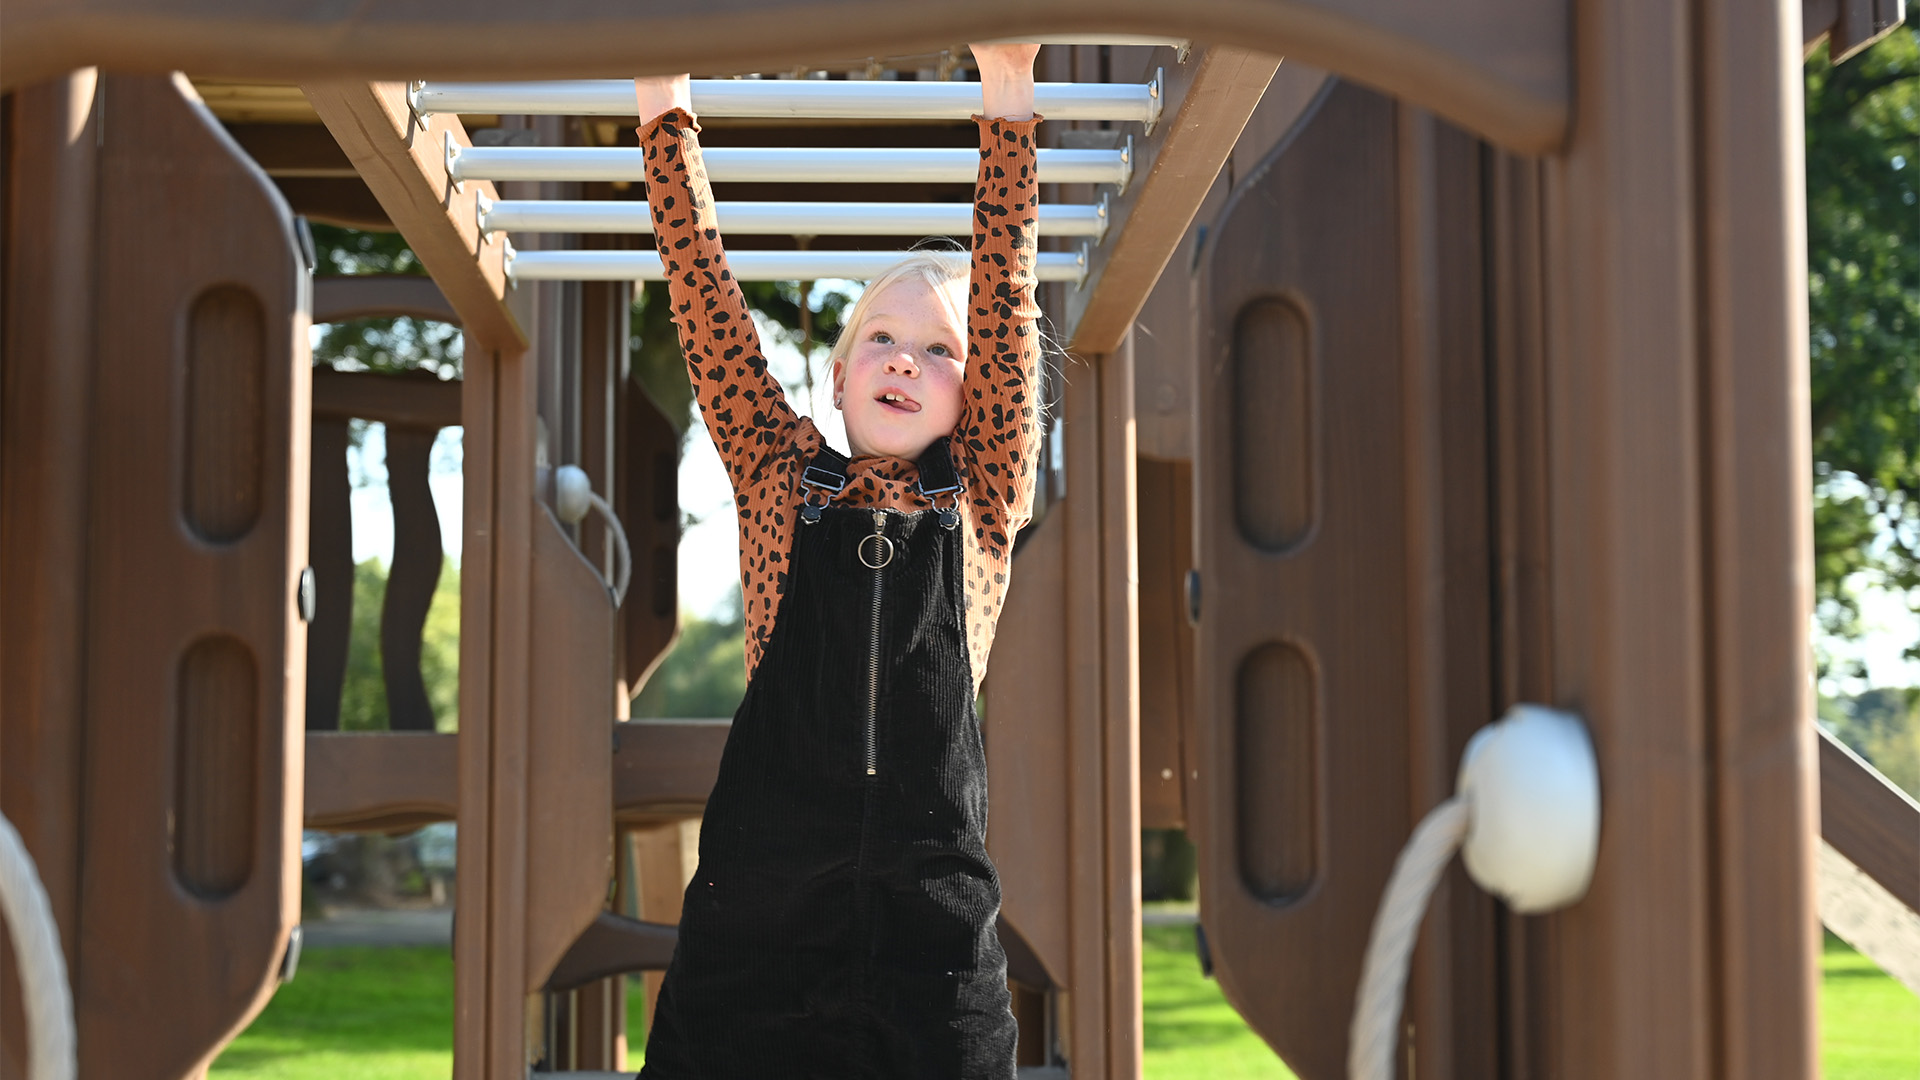 A young child with light hair in a black overall dress and long-sleeve orange polka dot shirt plays on monkey bars at a playground. They are smiling and looking up as they hang from the bars with both hands. The background is bright with green grass and trees.